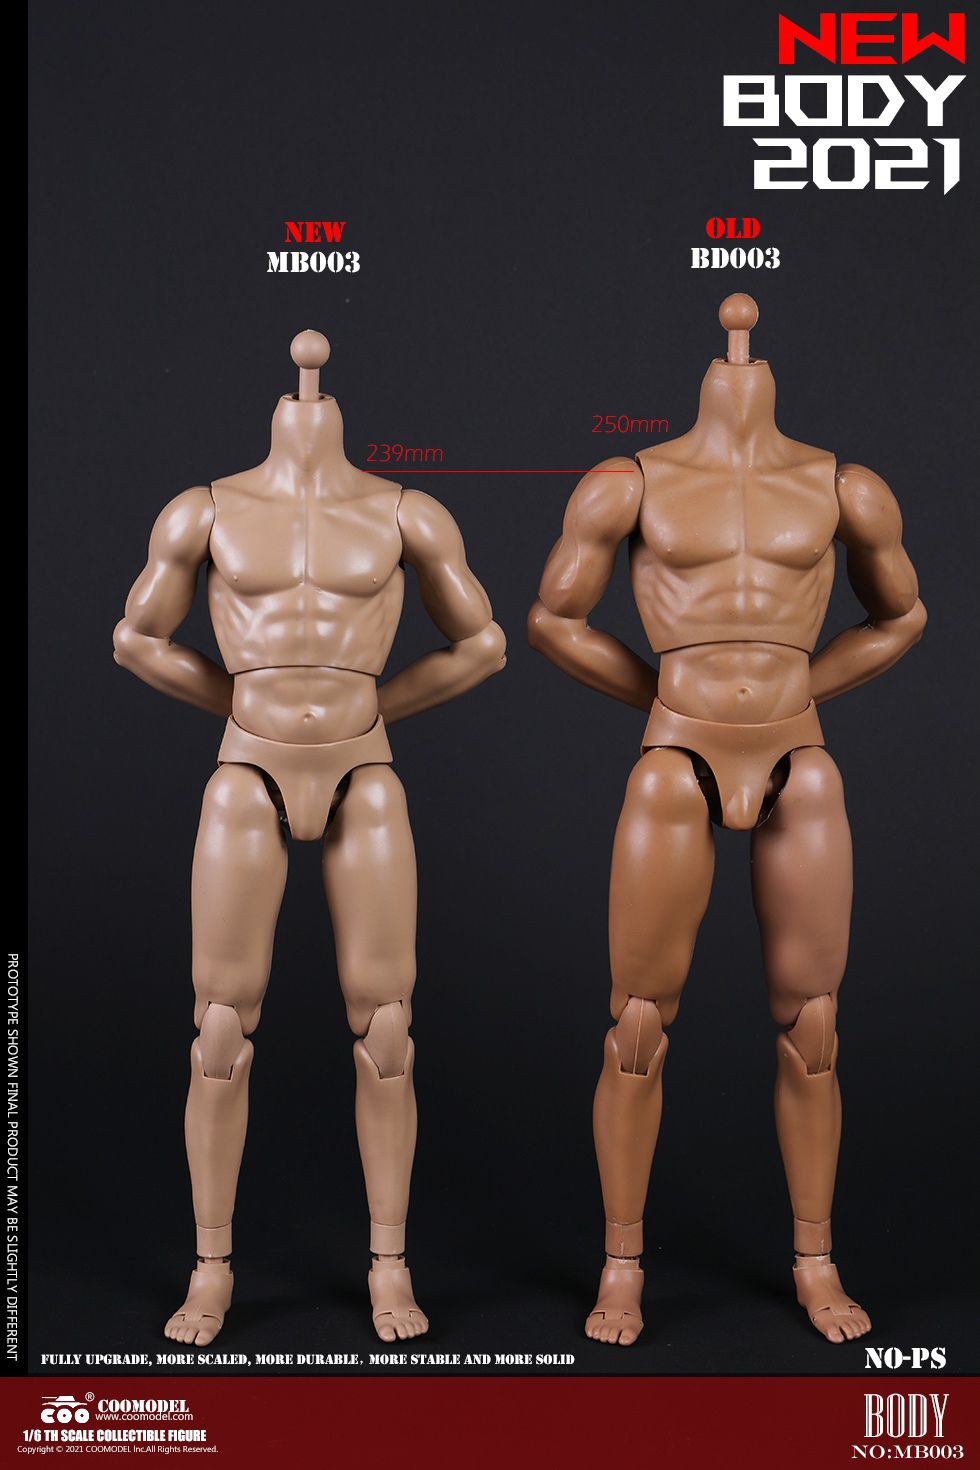 accessory - NEW PRODUCT: COOMODEL: 1/6 MB001 standard male body, MB002 tall male body, MB003 muscle male body, MB004 tall muscle body 18100310